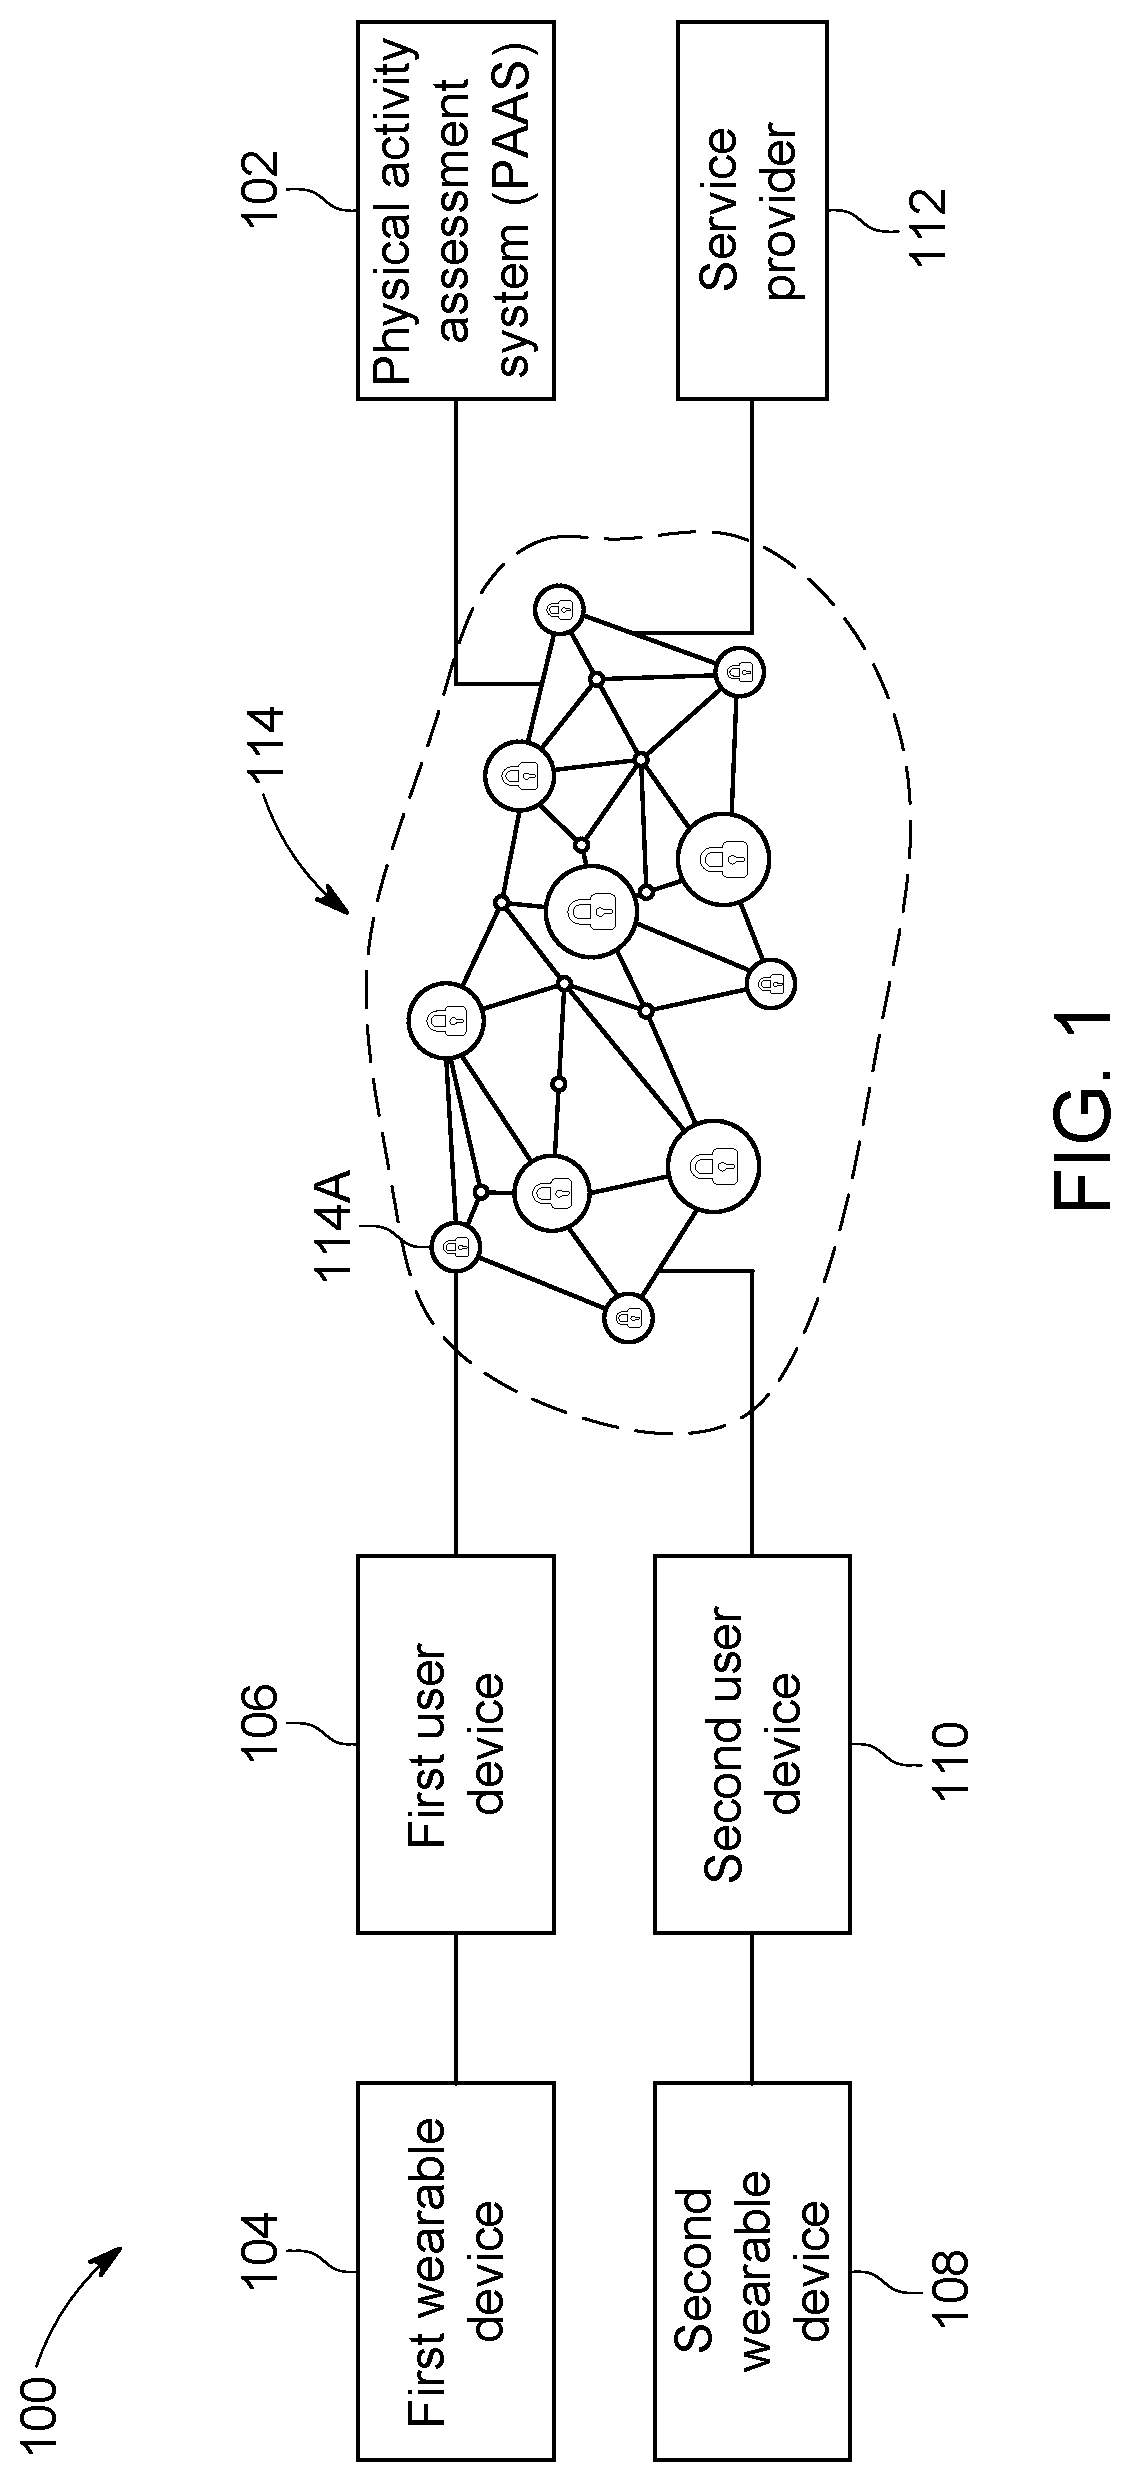 Physical activity assessment system and method to detect faulty physical activity data